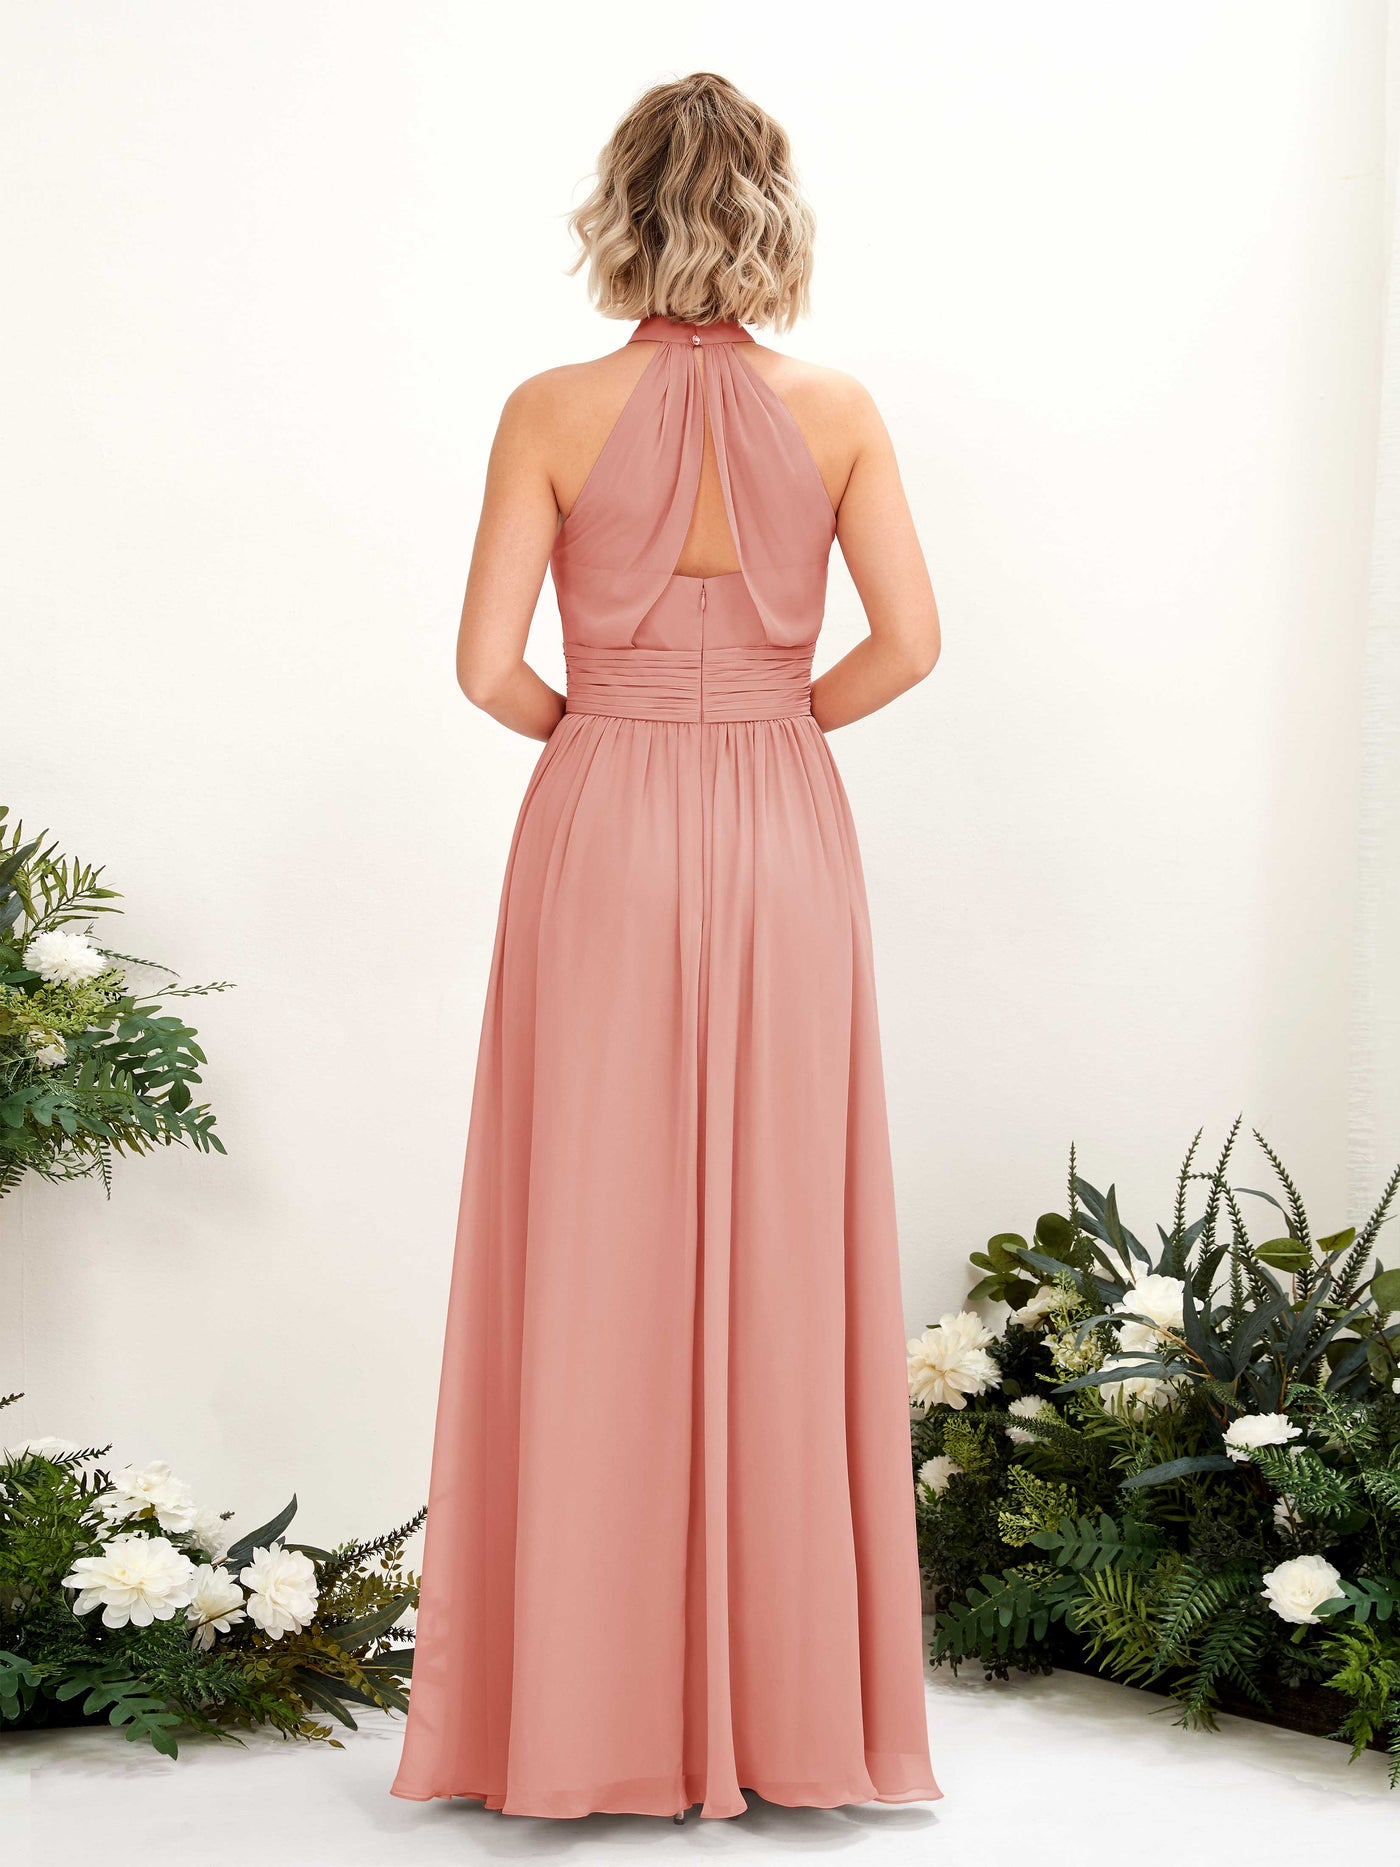 Champagne Rose Bridesmaid Dresses Bridesmaid Dress A-line Chiffon Halter Full Length Sleeveless Wedding Party Dress (81225306)#color_champagne-rose